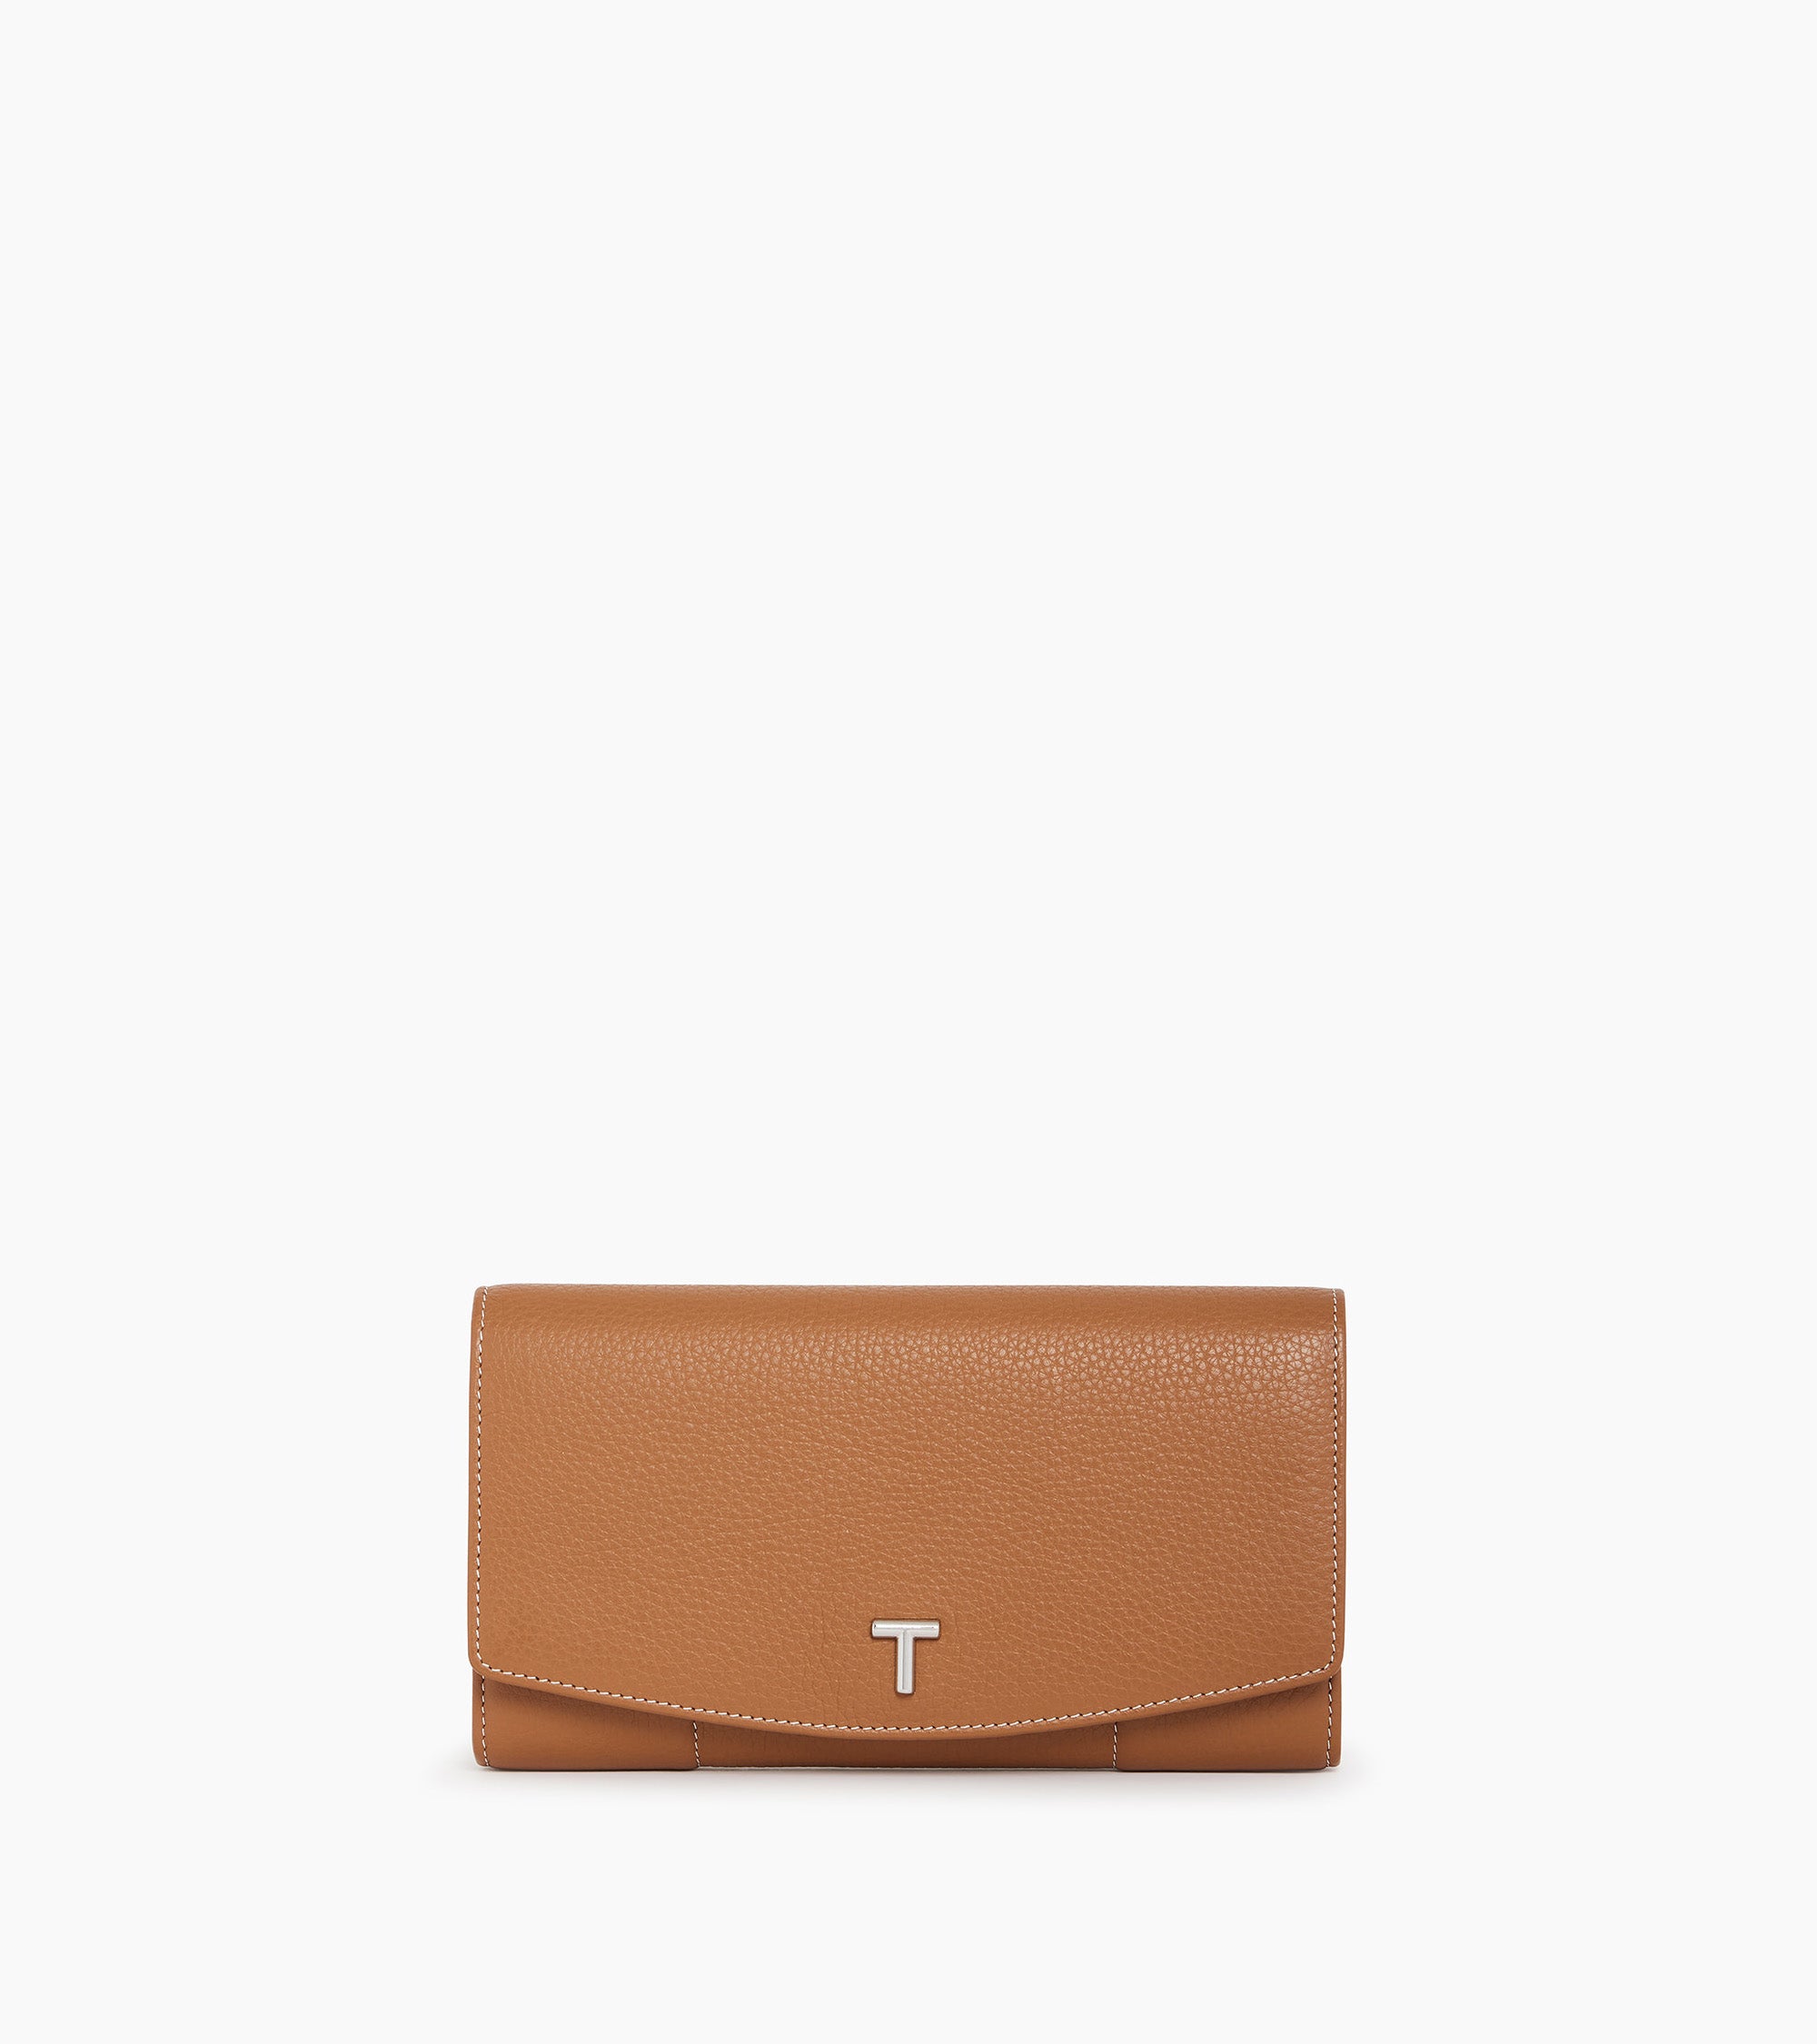 Romy large, zipped wallet in pebbled leather